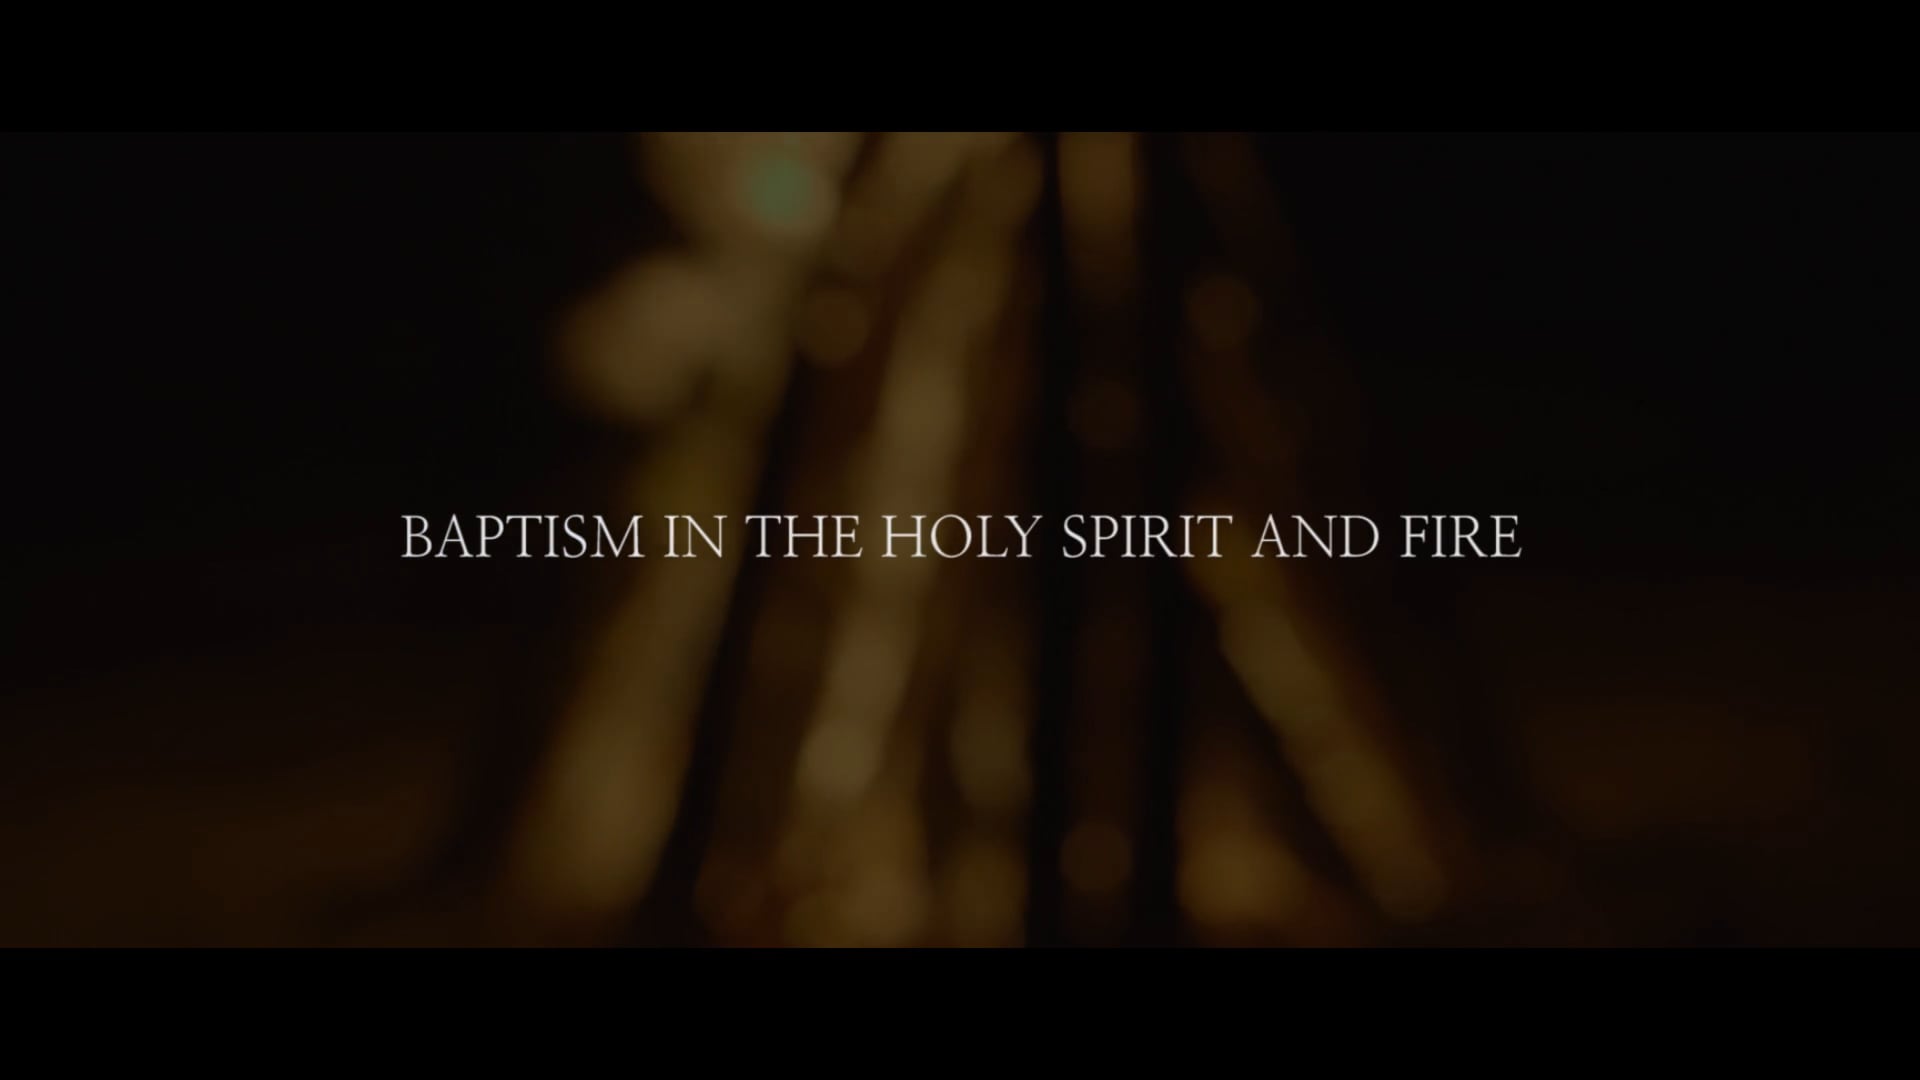 Baptism in the Holy Spirit and Fire | Segment 3 | The Wild Goose Series